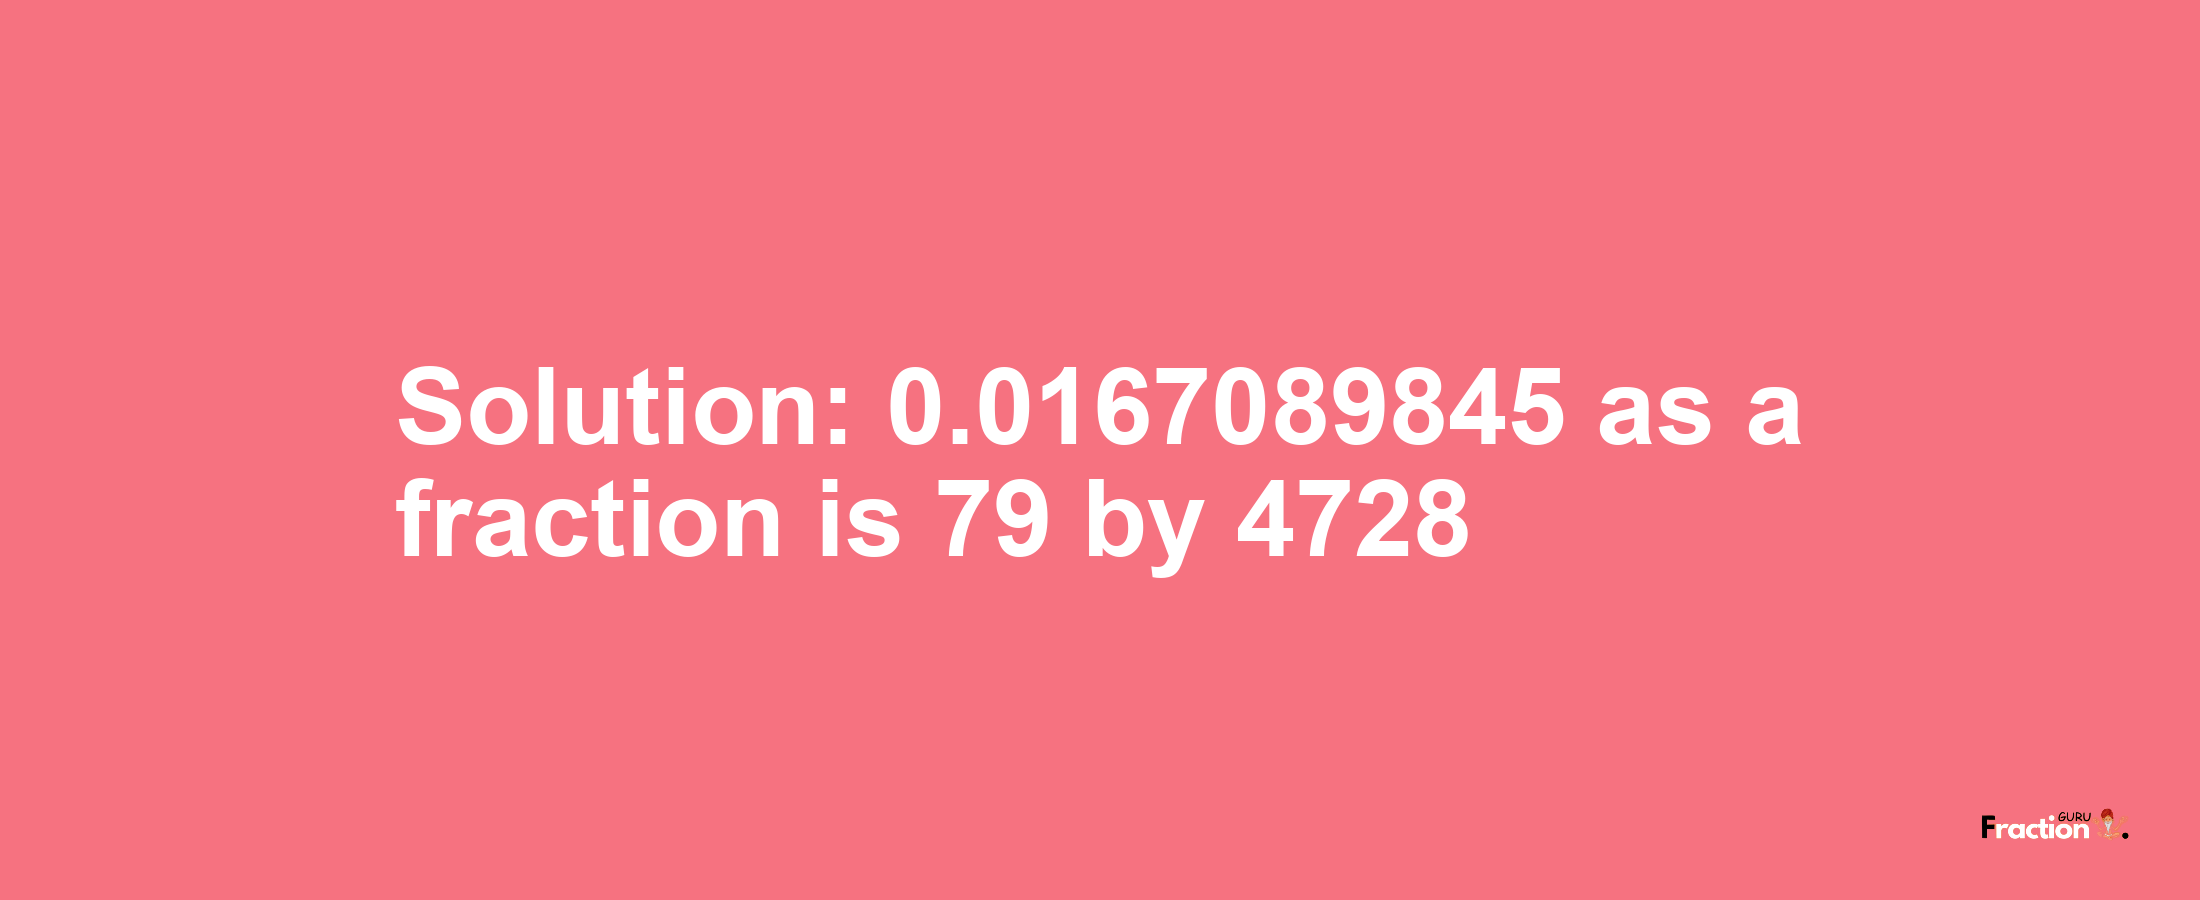 Solution:0.0167089845 as a fraction is 79/4728